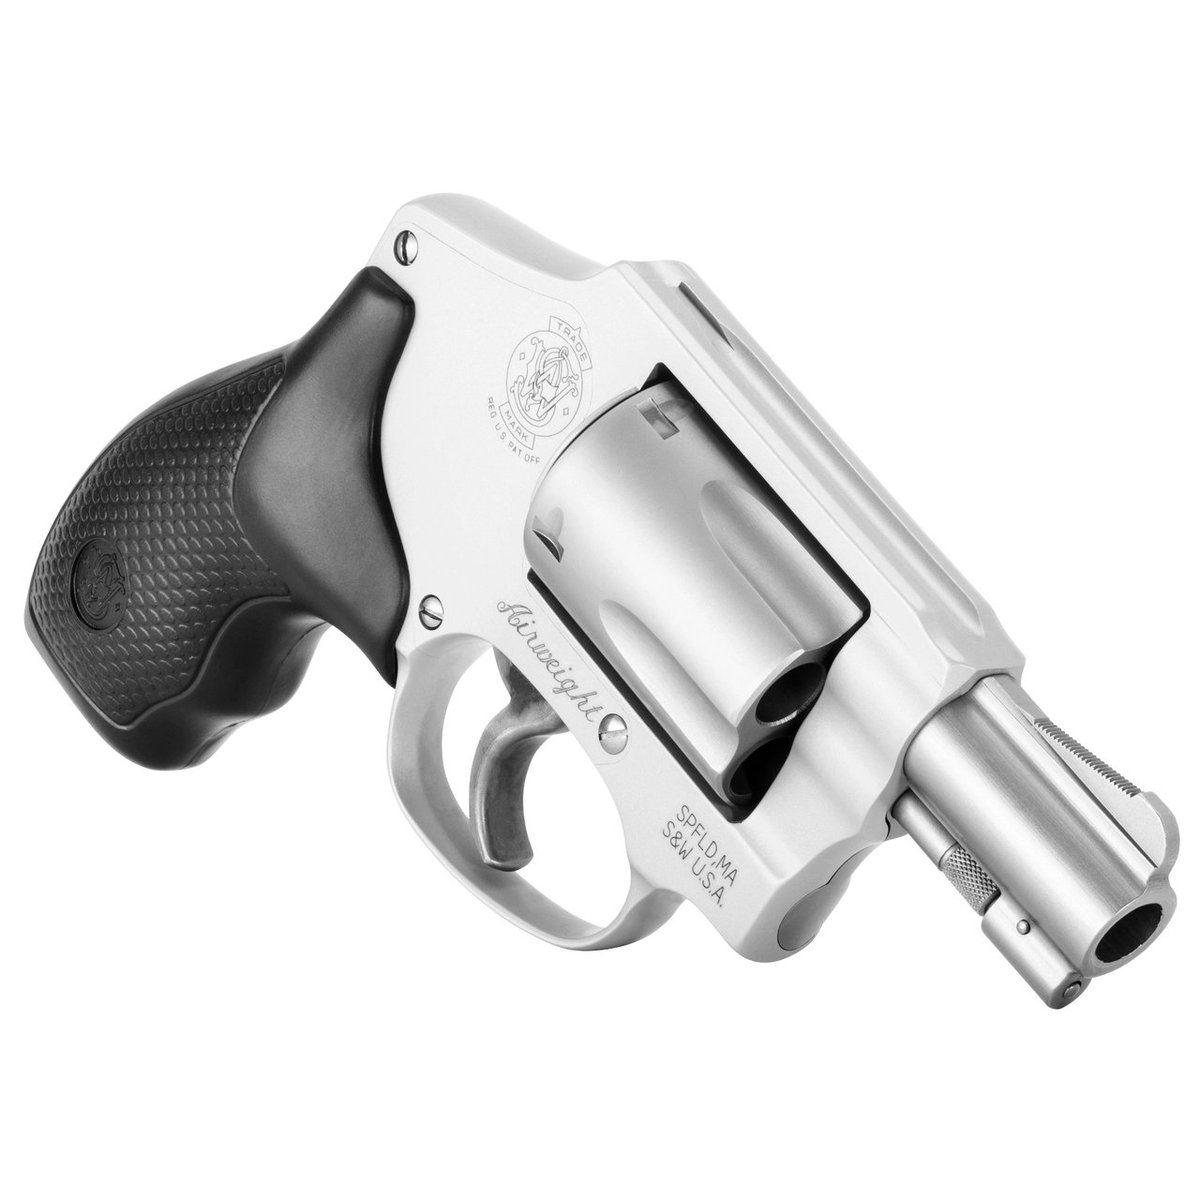 Smith & Wesson Airweight 642 38 Special J-Frame for $399/ea currently here: mrgunsngear.org/3PIVcxQ

#EDC #JFrame